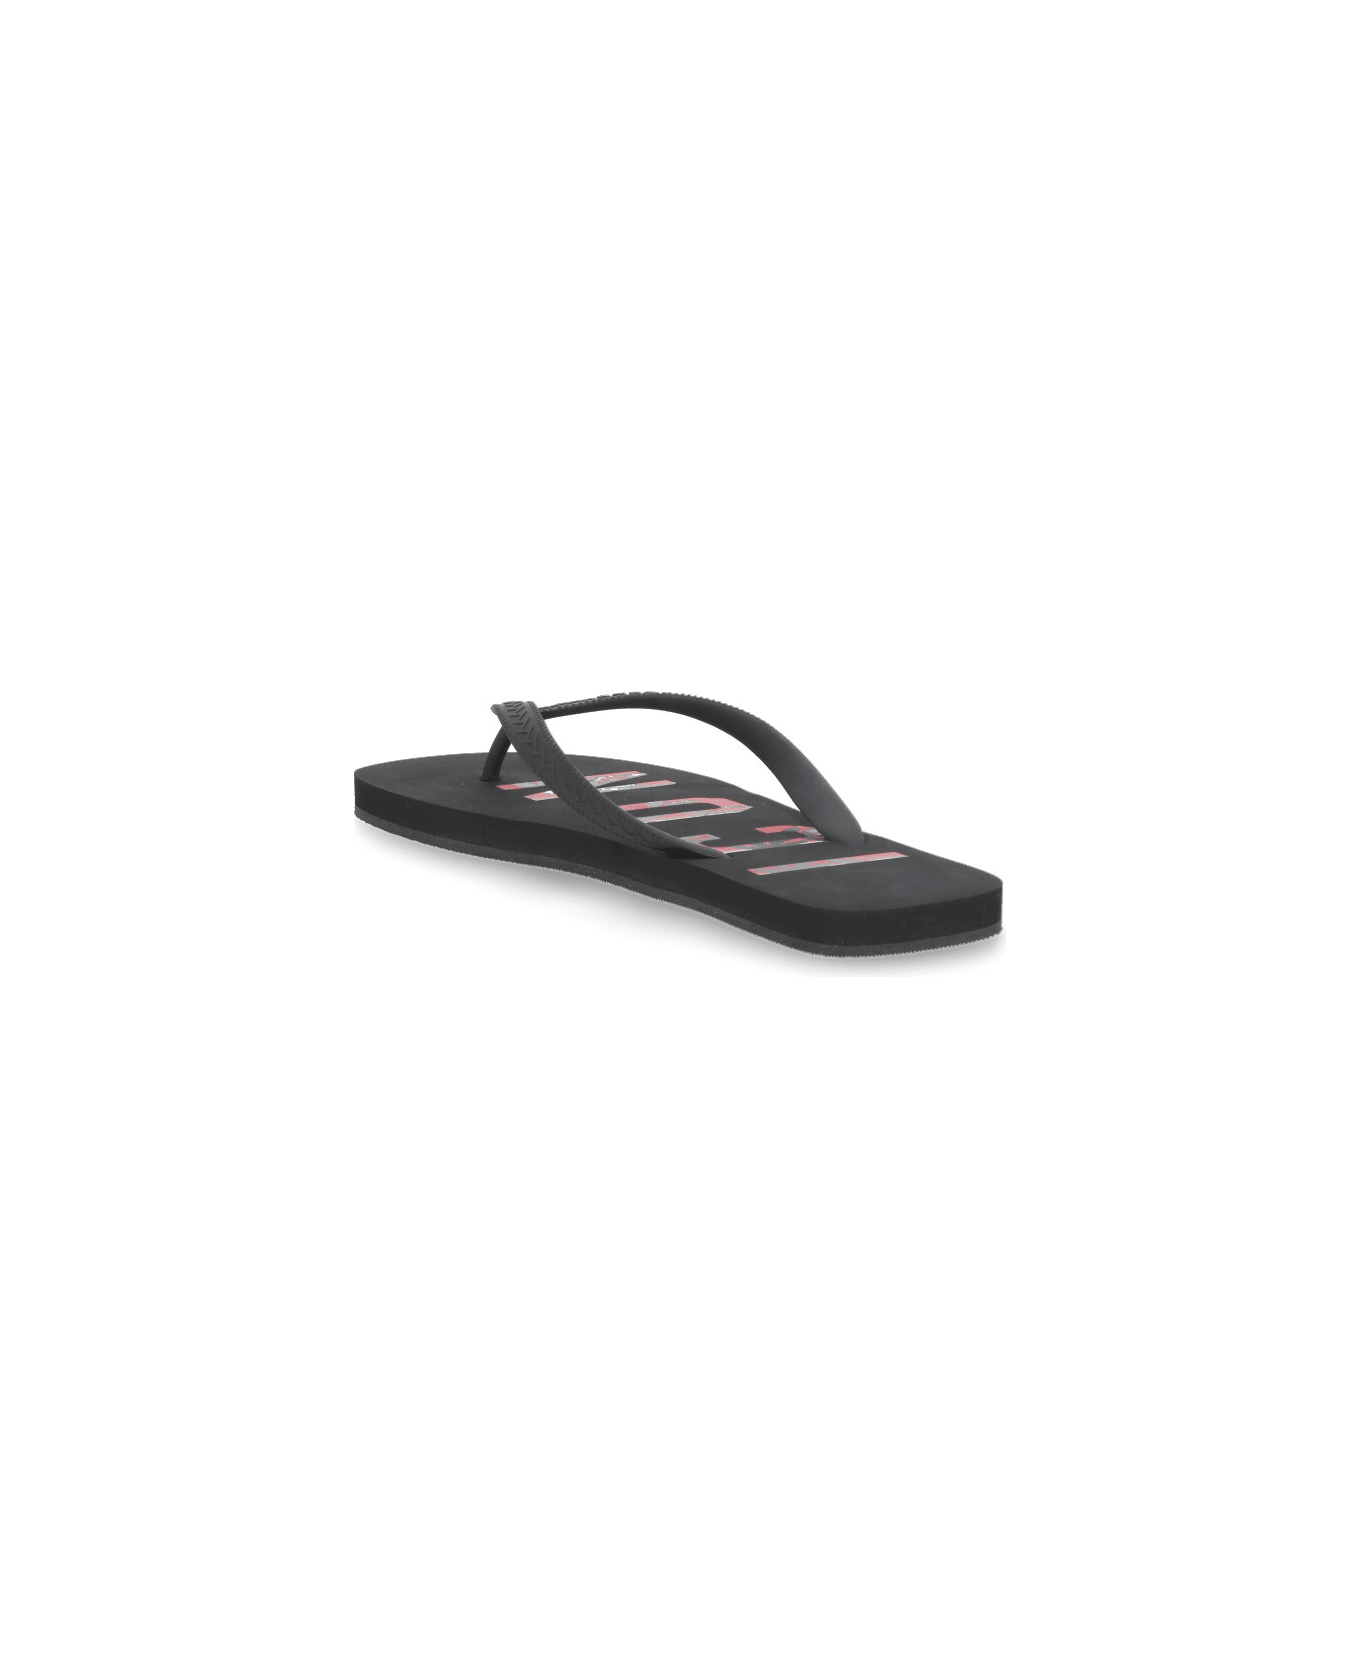 Dsquared2 Rubber Thong Sandal - Black その他各種シューズ